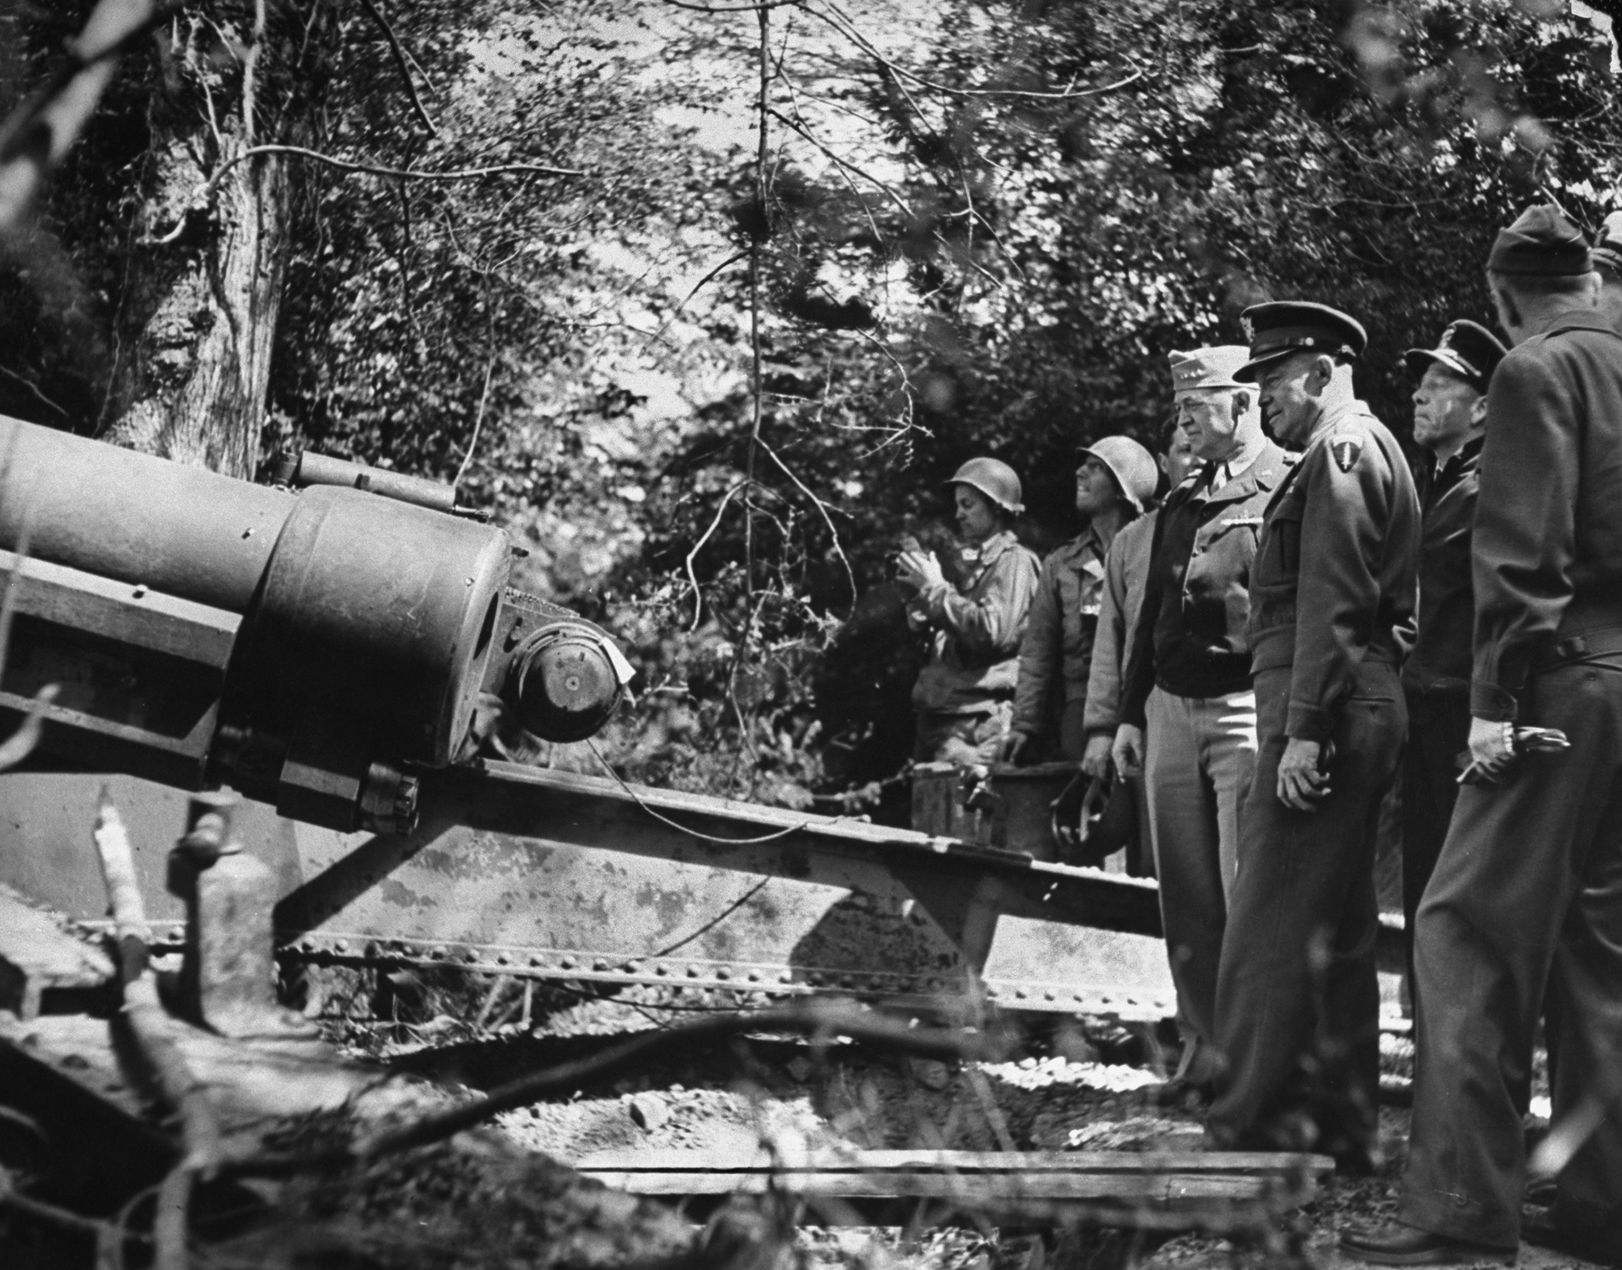 General Henry “Hap” Arnold, chief of the U.S. Army Air Forces, and Supreme Allied Commander Dwight Eisenhower inspect a 155mm German gun discovered hidden in the Normandy woods. 